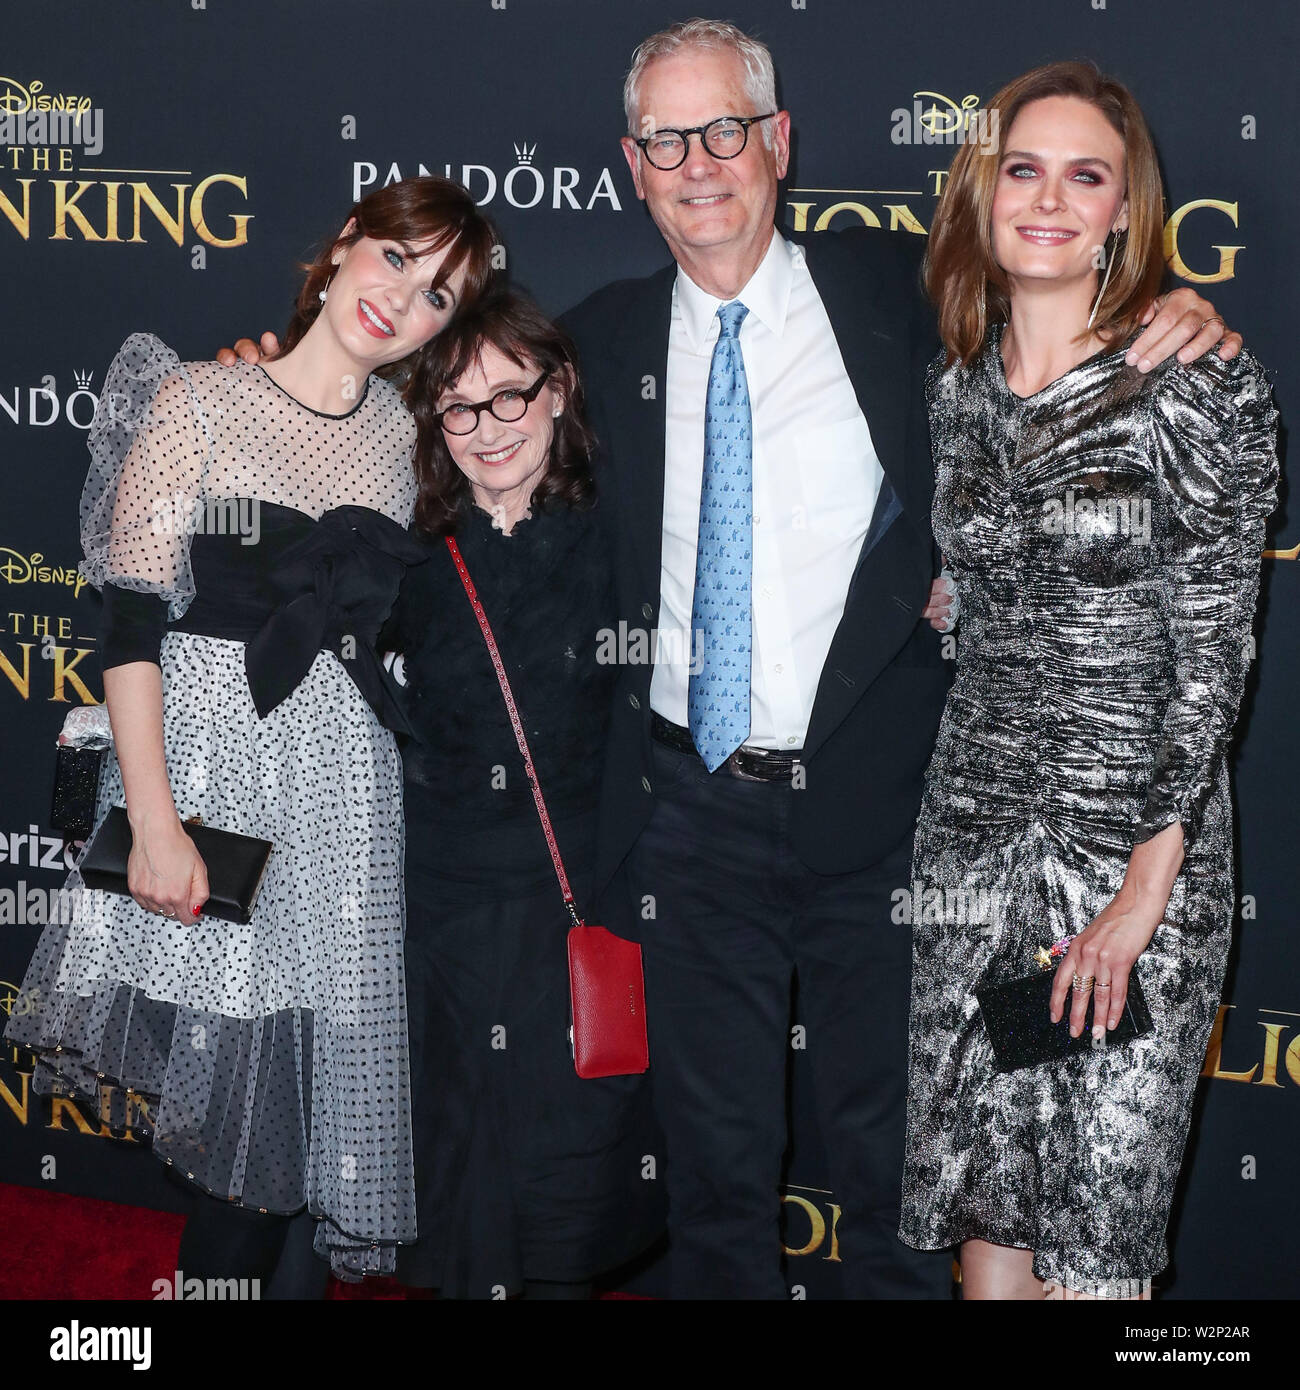 HOLLYWOOD, LOS ANGELES, CALIFORNIA, USA - JULY 09: Zooey Deschanel, Mary Jo Deschanel, Caleb Deschanel and Emily Deschanel arrive at the World Premiere Of Disney's 'The Lion King' held at the Dolby Theatre on July 9, 2019 in Hollywood, Los Angeles, California, United States. (Photo by Xavier Collin/Image Press Agency) Stock Photo